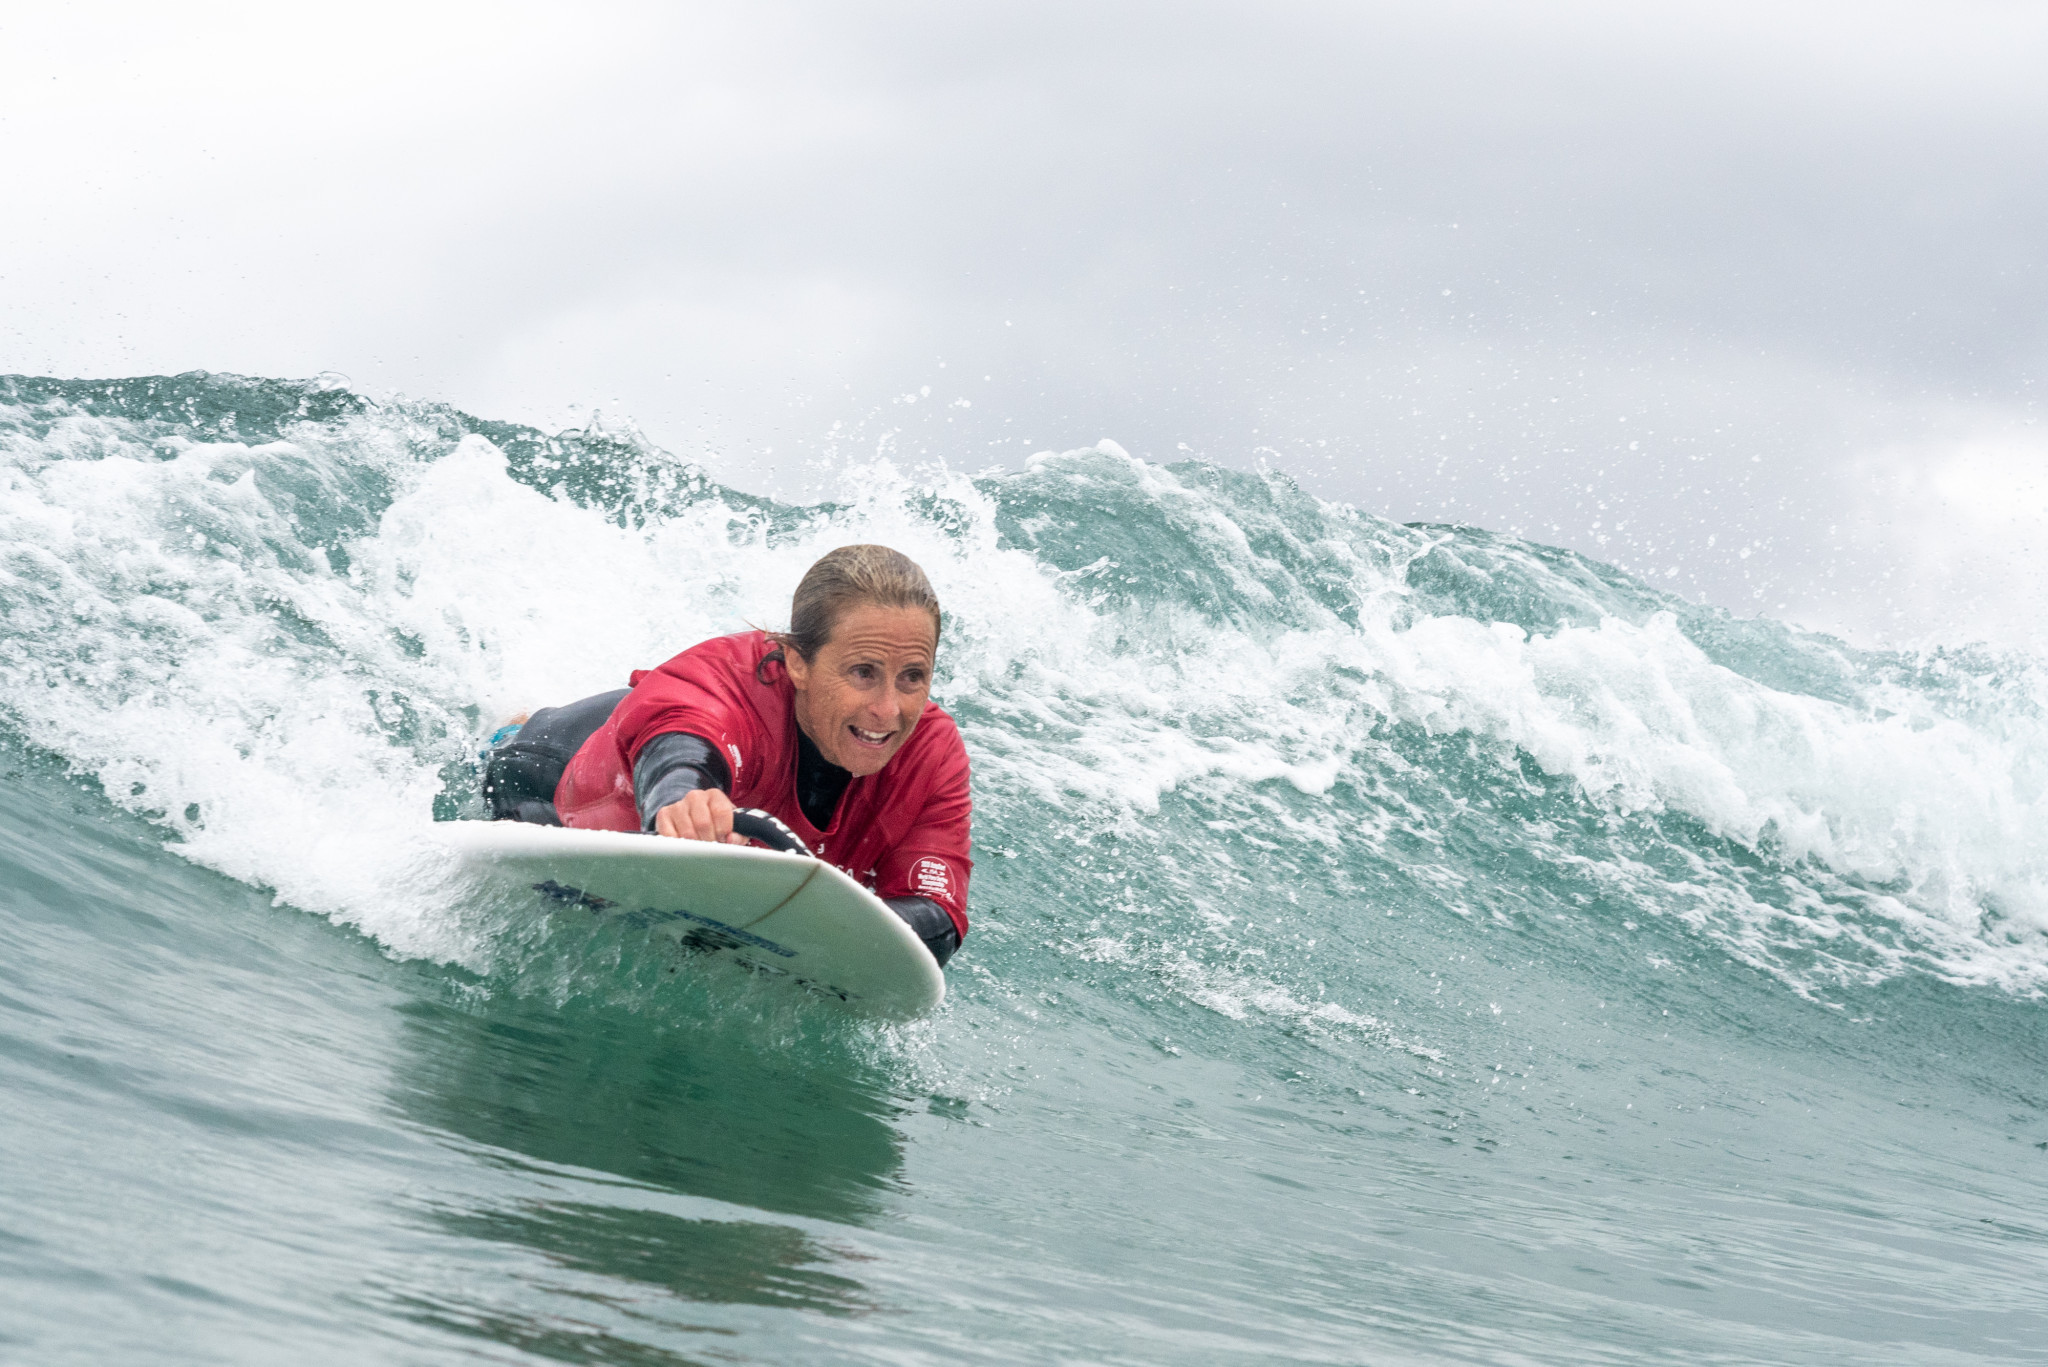 Bloom collects best score on penultimate day of World Para Surfing Championships